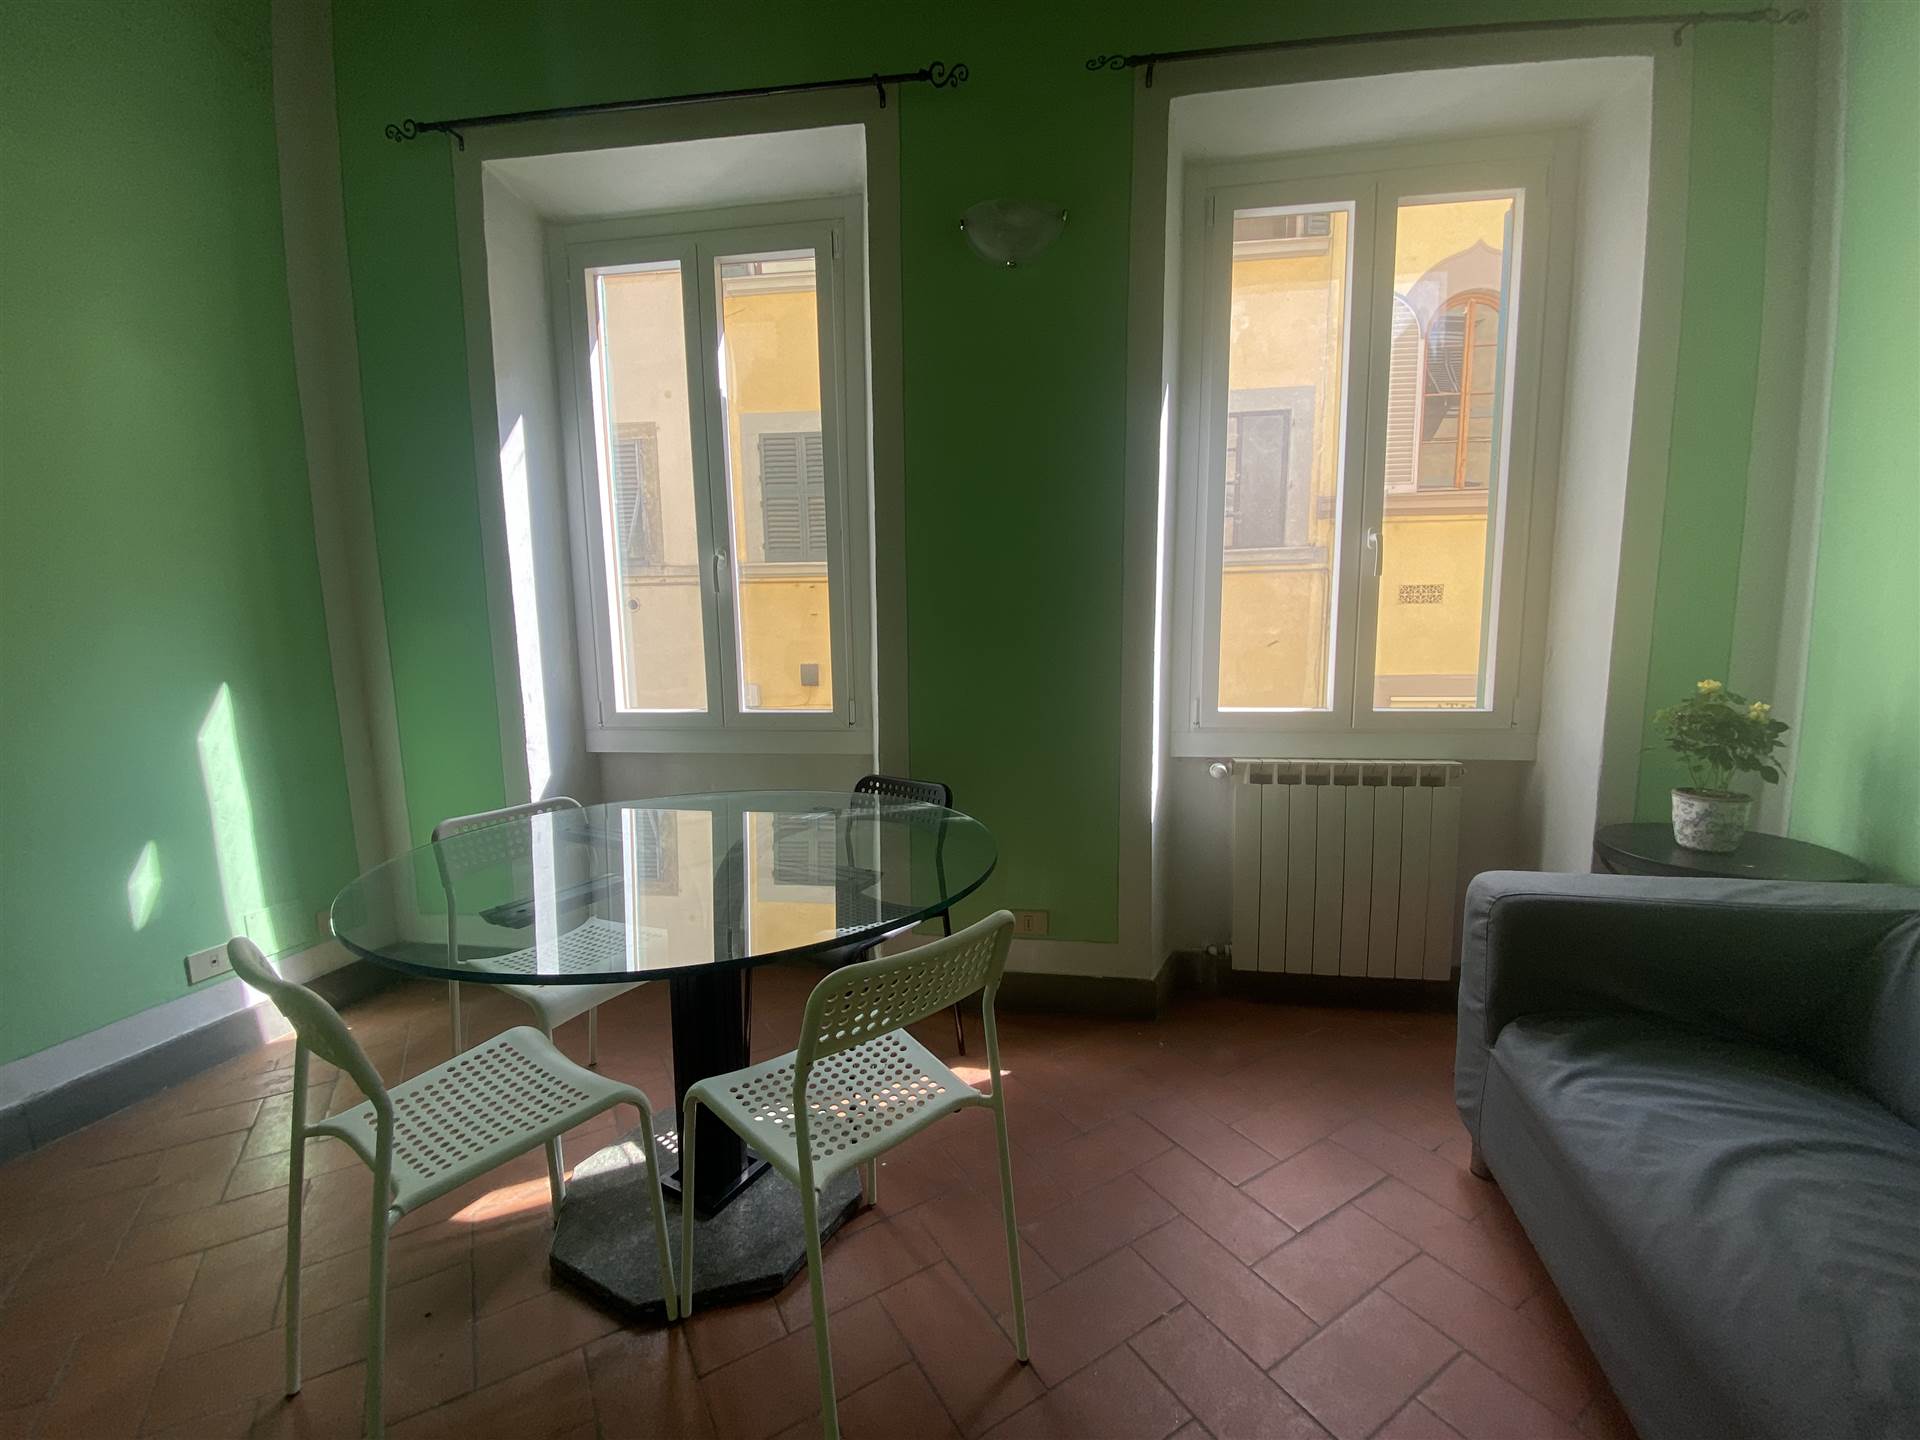 SANTO SPIRITO, FIRENZE, Apartment for sale of 70 Sq. mt., Good condition, Heating Individual heating system, Energetic class: G, Epi: 175 kwh/m2 year,